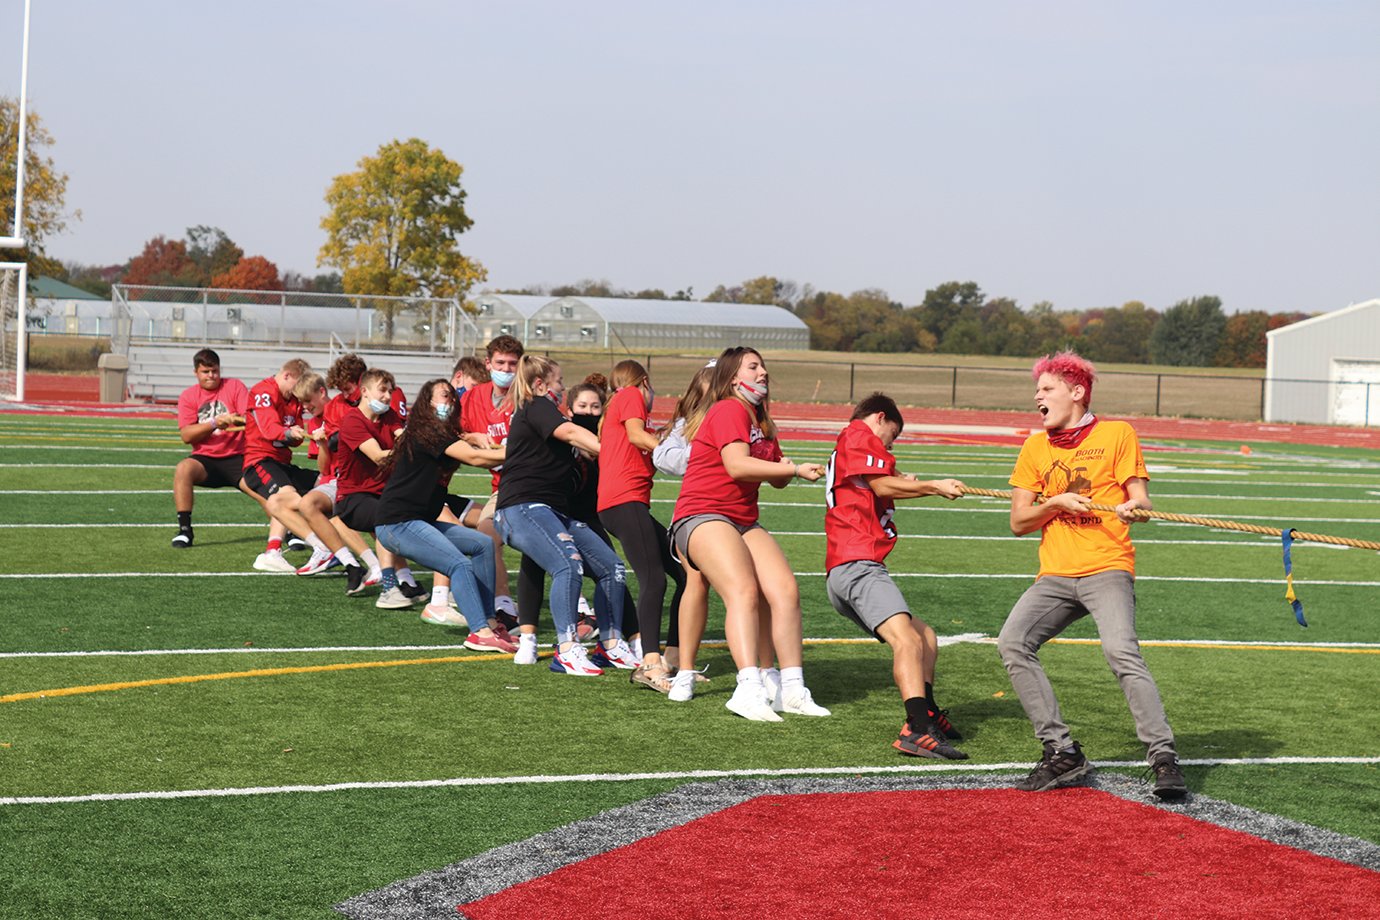 A tug-of-war competition ensues Friday between Southmont sophomores and freshmen.